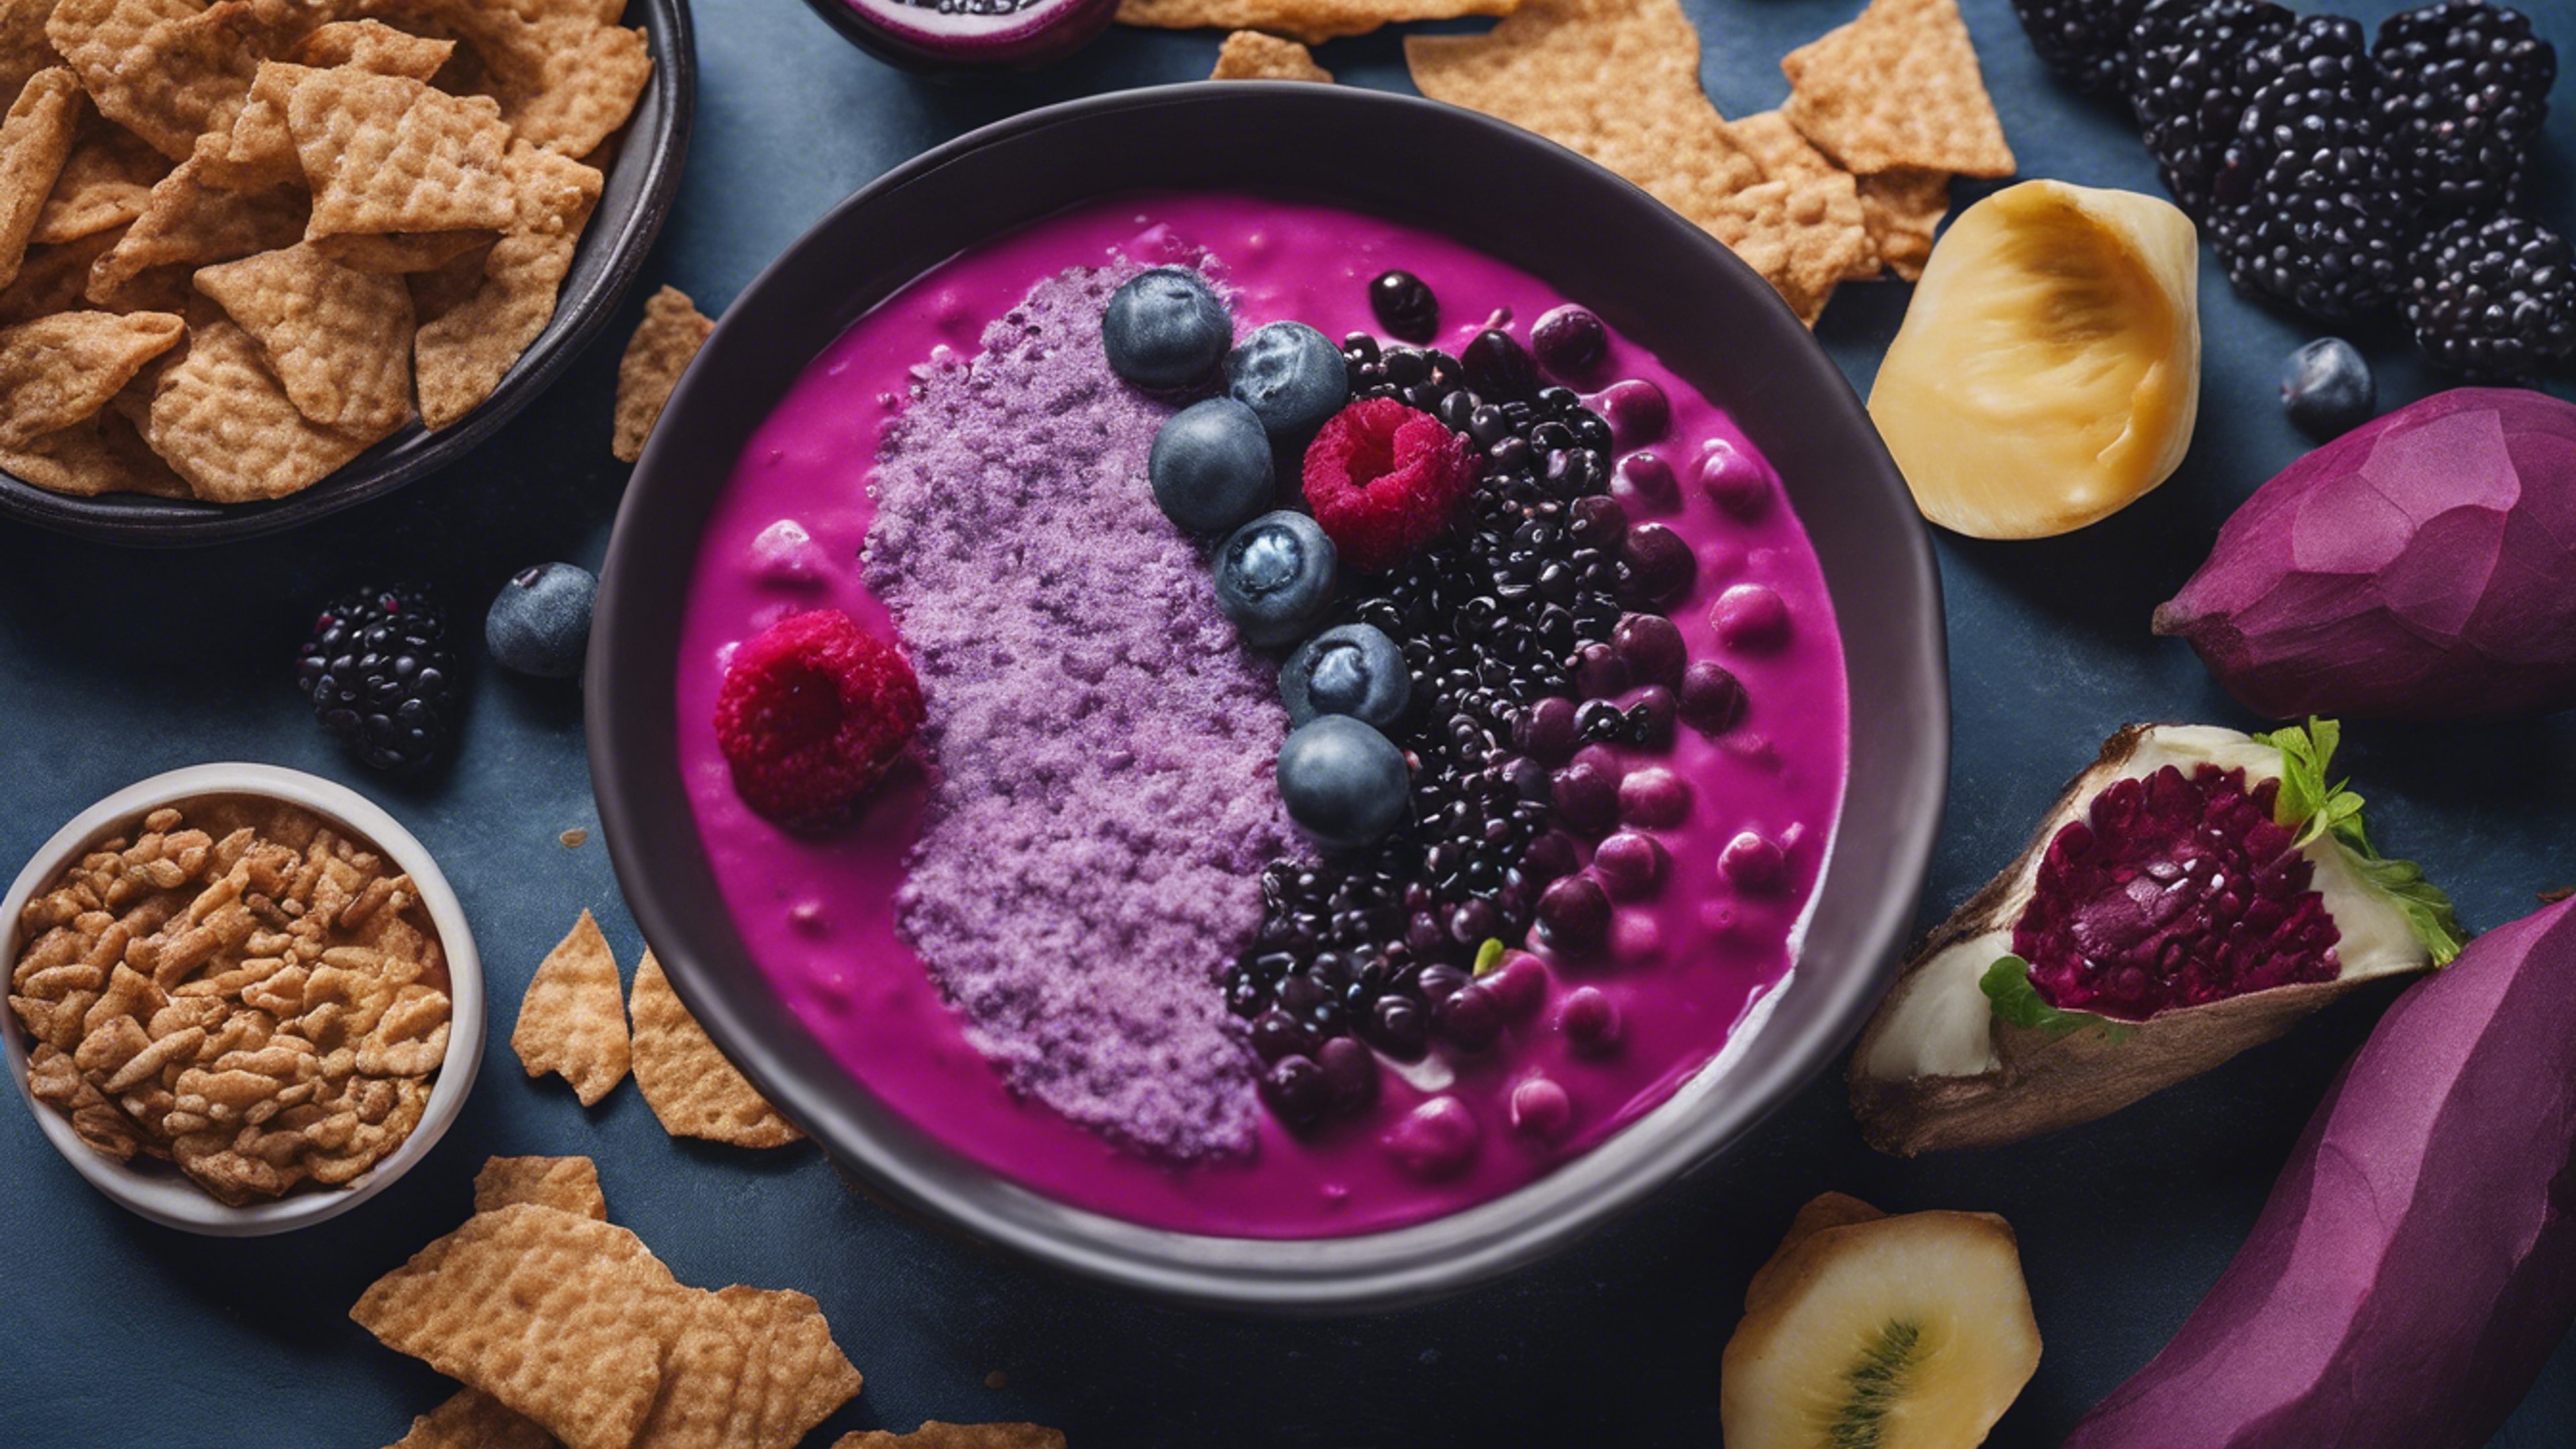 An eye-catching food collage, with purple foods like acai bowls, blue corn chips, and beetroot soup. Wallpaper[72264552455b47748fee]